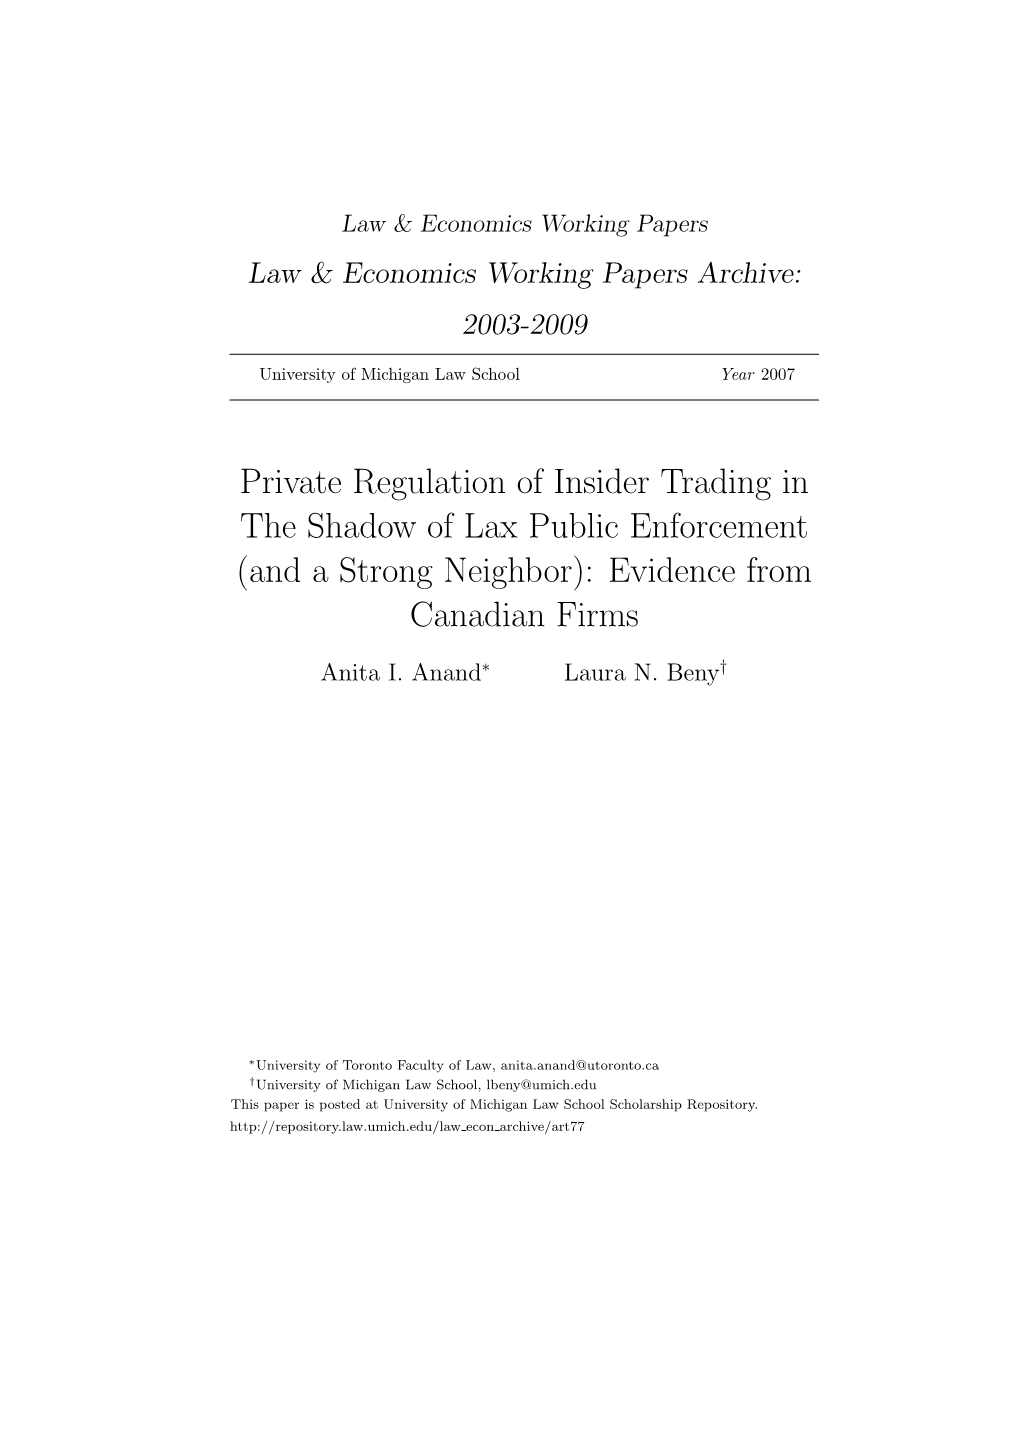 Private Regulation of Insider Trading in the Shadow of Lax Public Enforcement (And a Strong Neighbor): Evidence from Canadian Firms